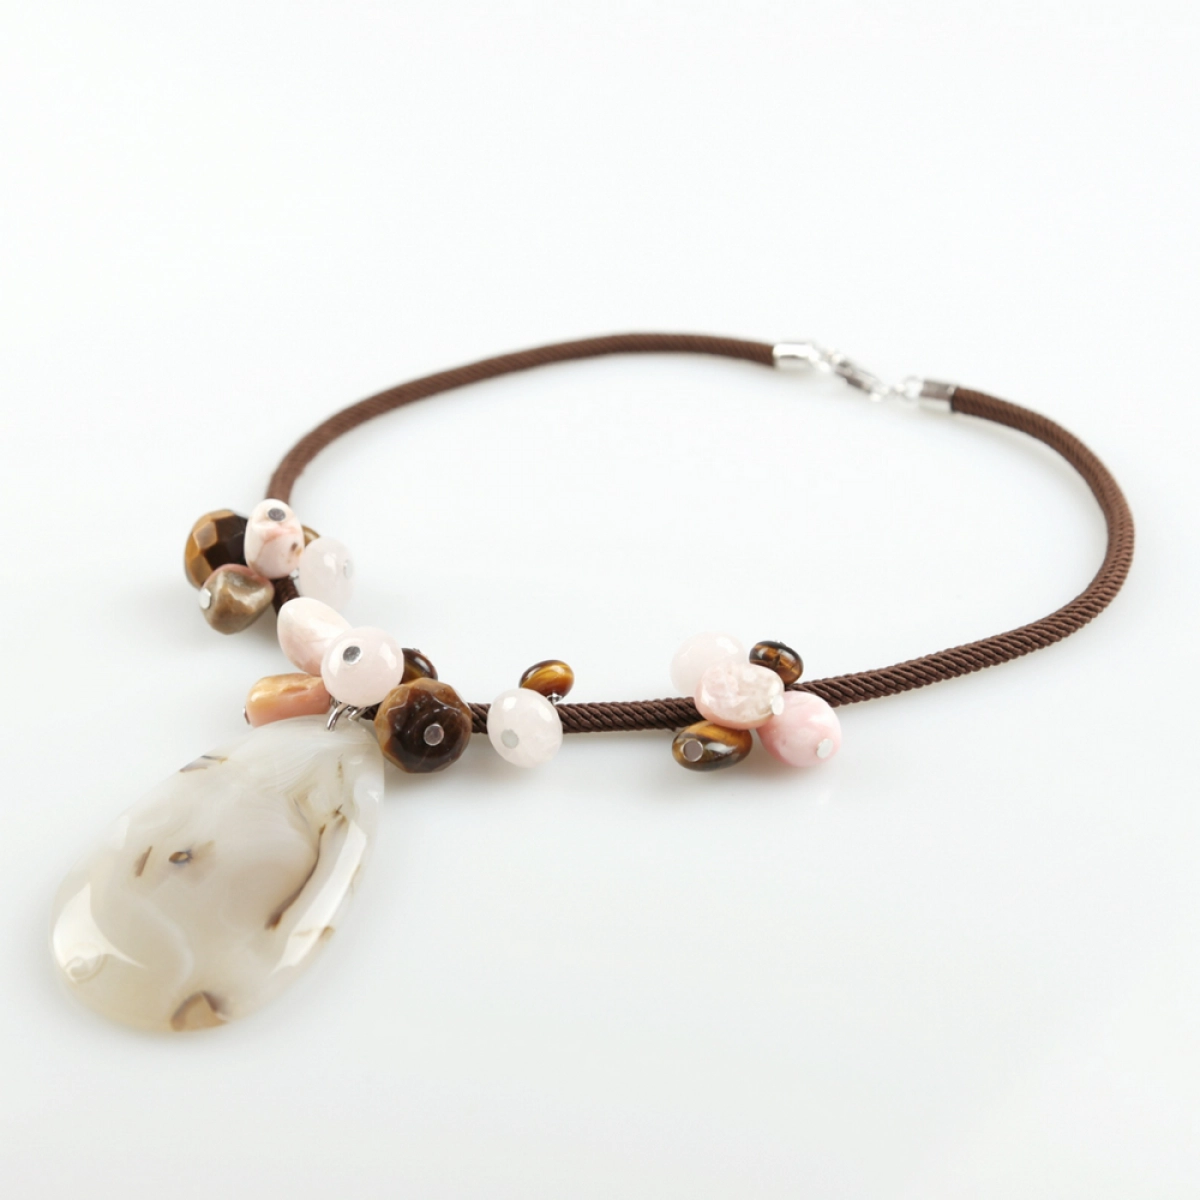 NECKLACE CORD BROWN WITH PENDANT OF AGATE BUC271 PATRICIA GARCIA